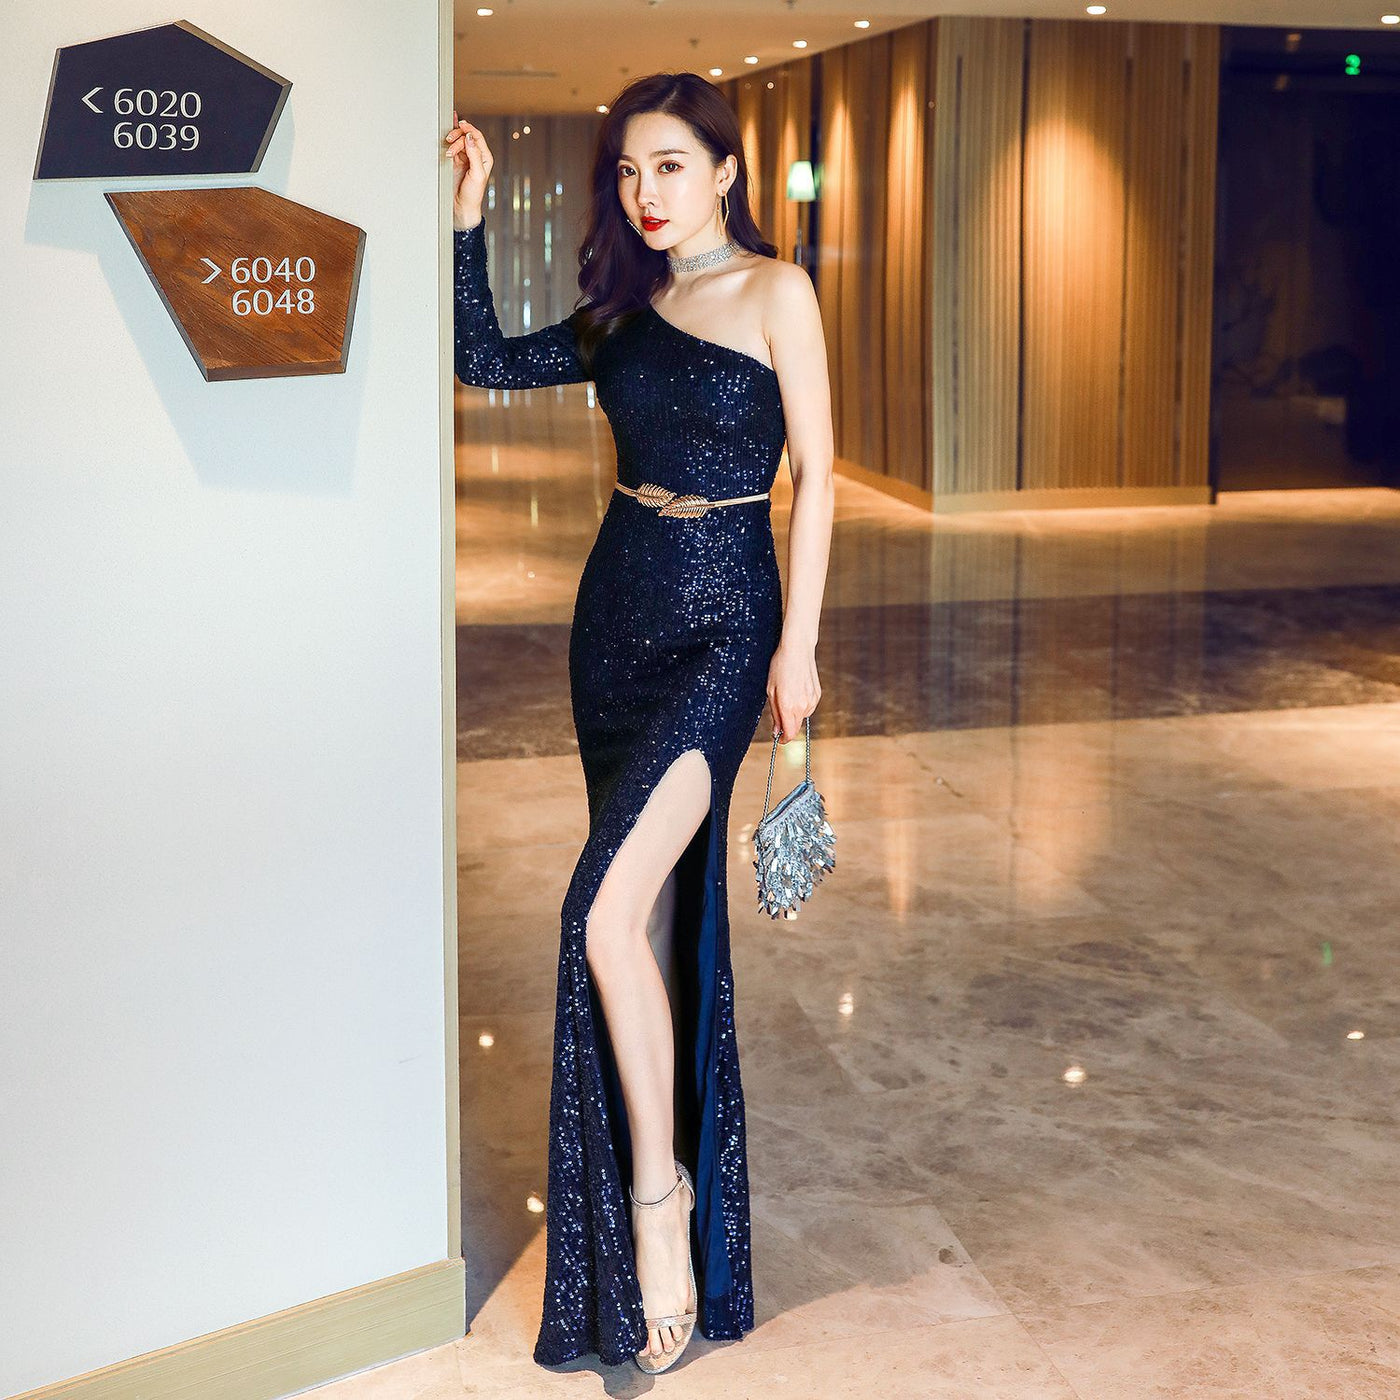 Women Dress Fairy Dream Socialite Gathering Party Evening Dress Sexy Long Slimming Toast Dress Bride Formal Gown